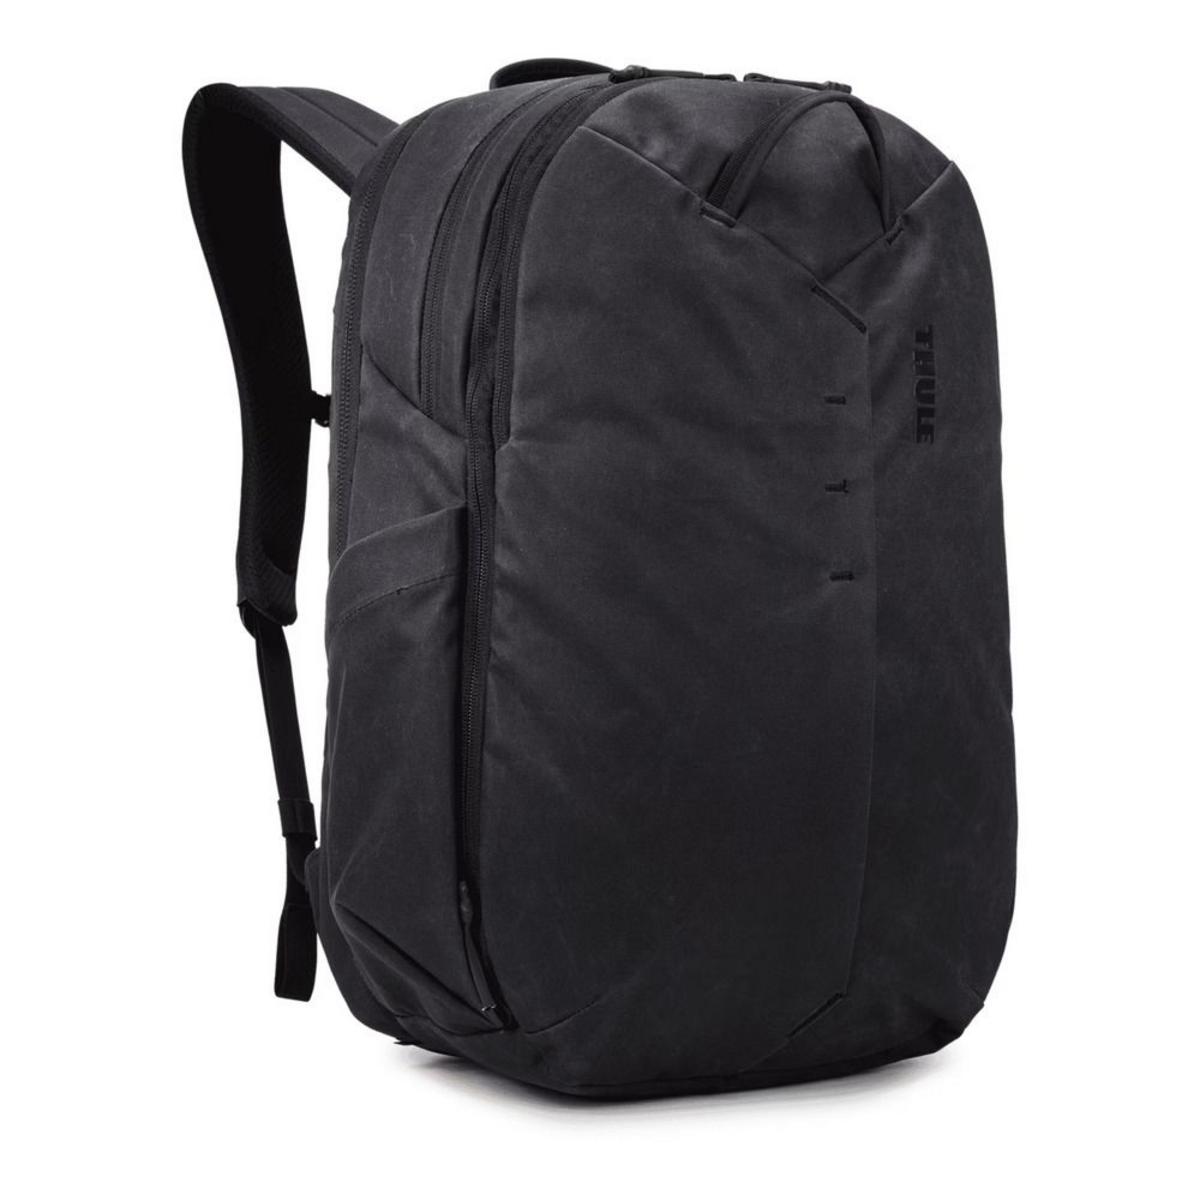 Thule Aion 28L Travel Backpack